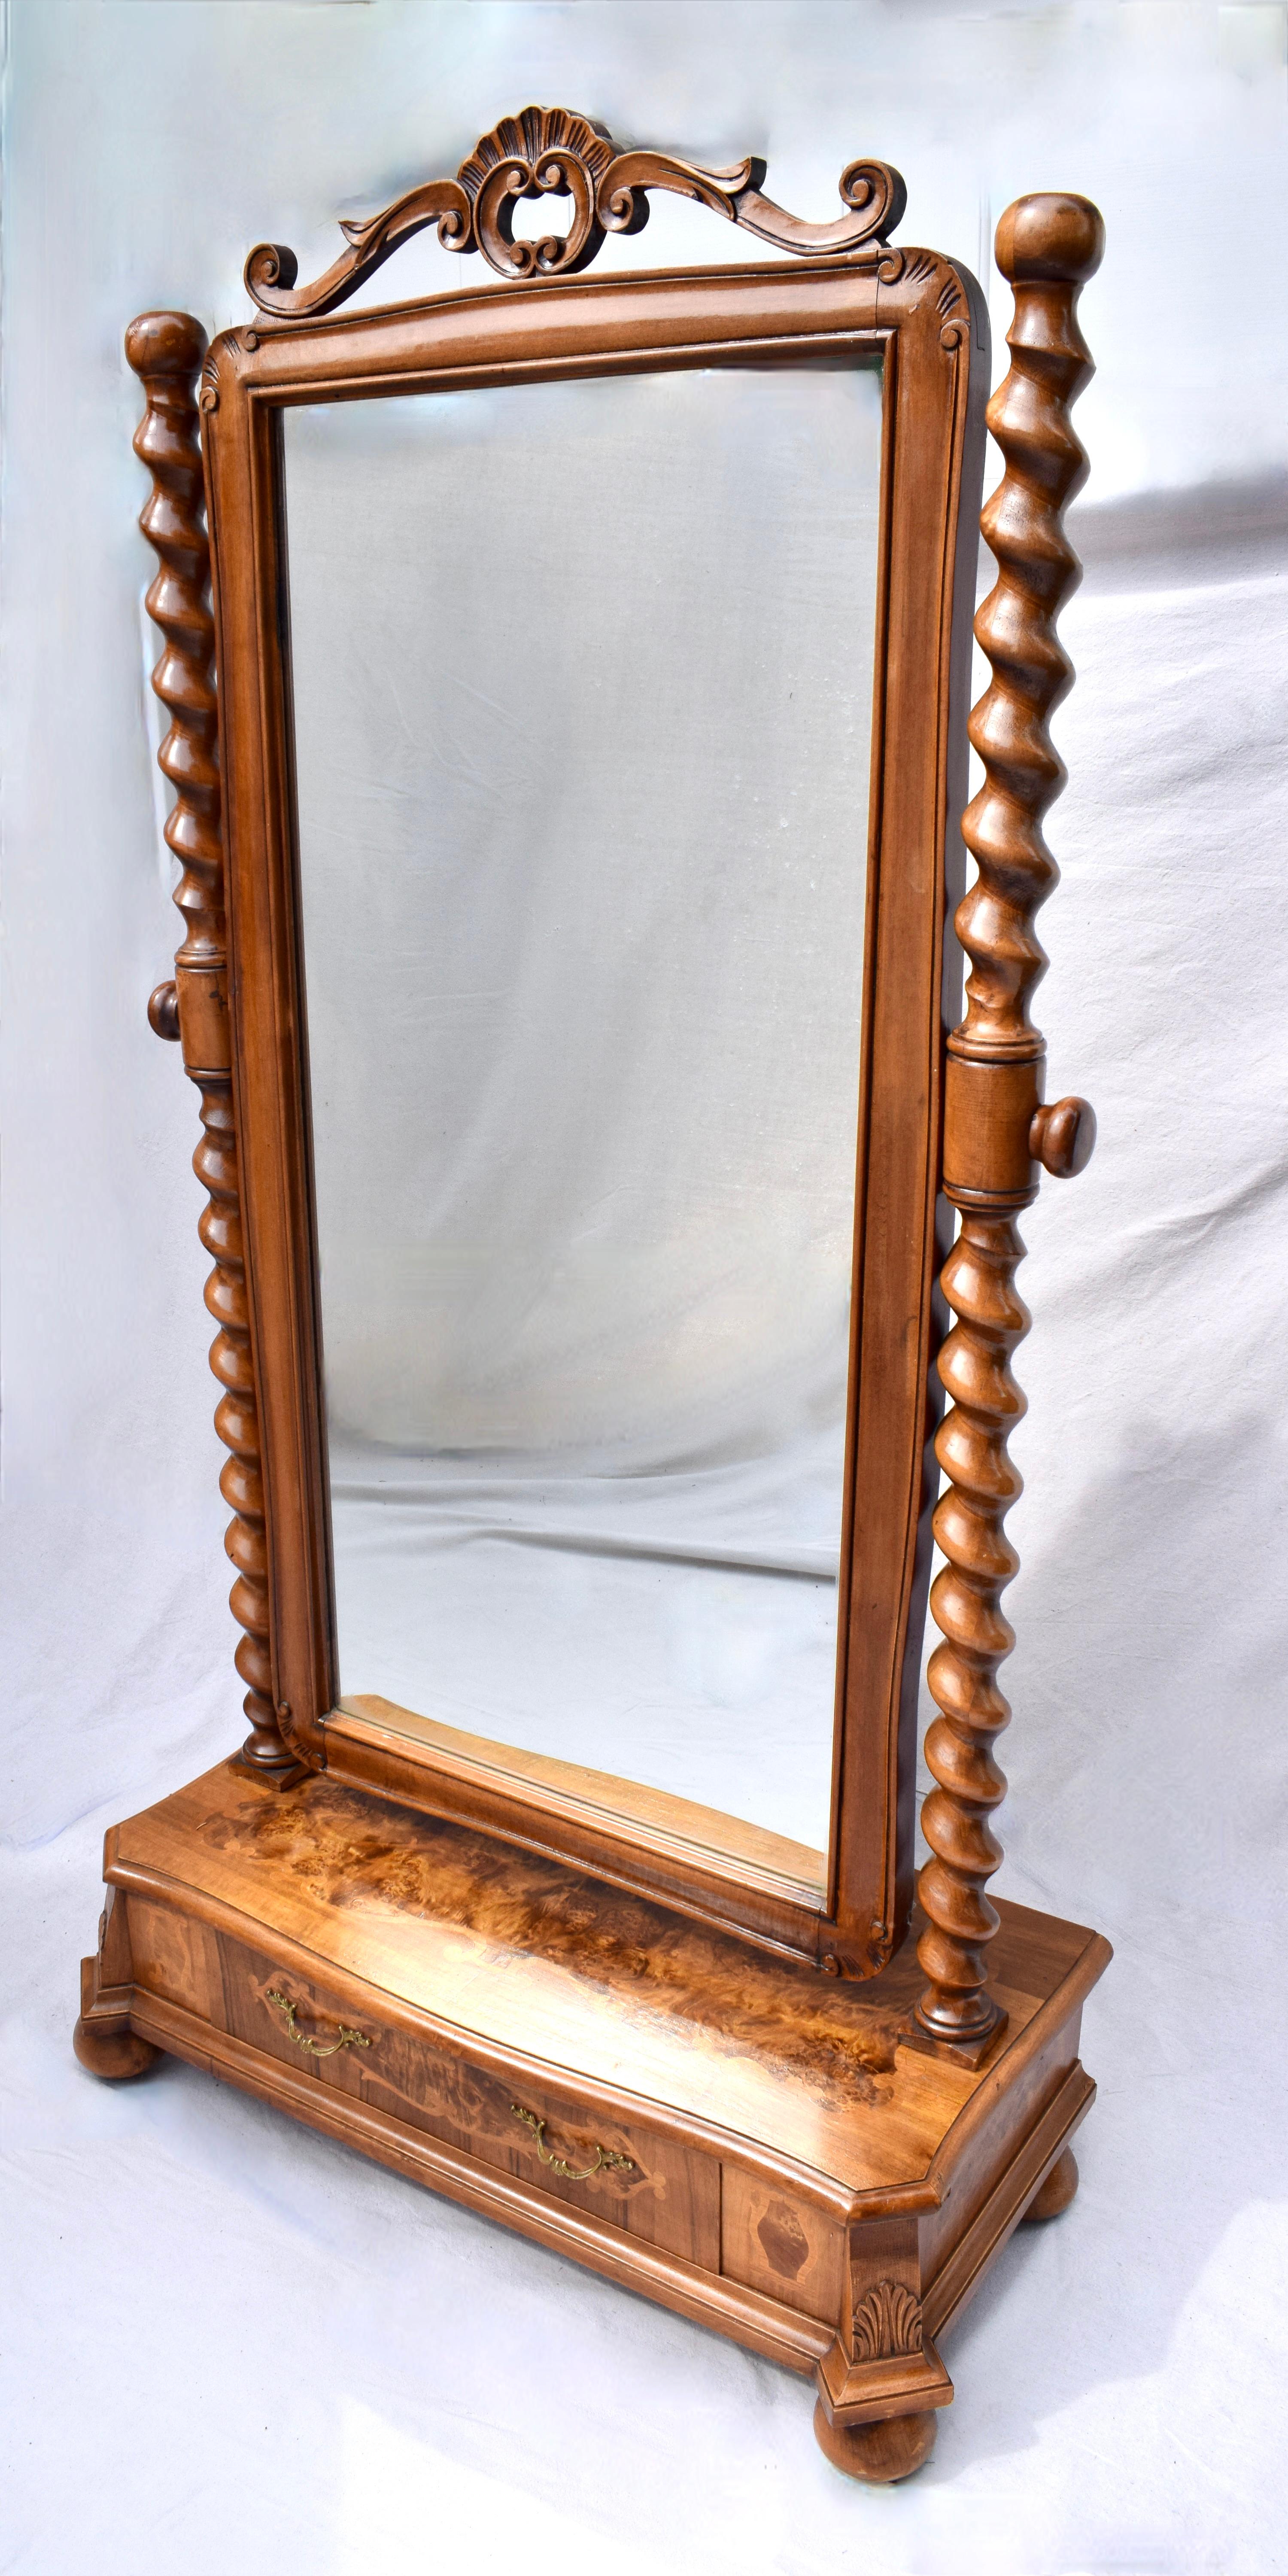 Monumental Italian Olive Burl Barley Twist Cheval Mirror In Good Condition For Sale In Southampton, NJ